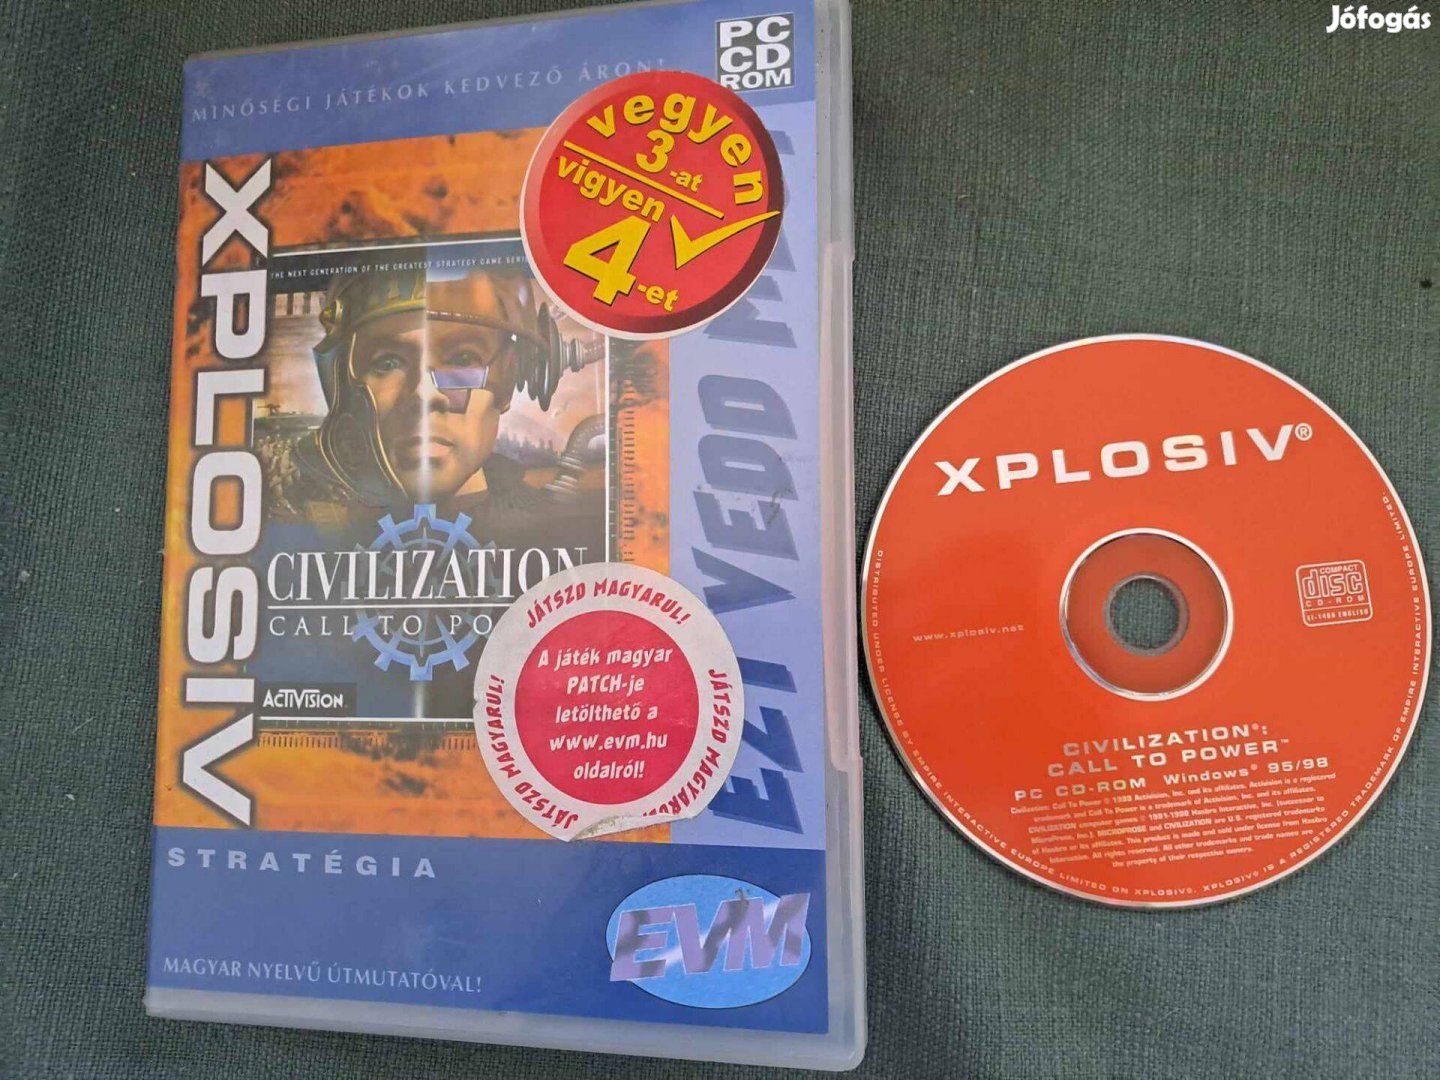 Civilization: Call to Power PC CD